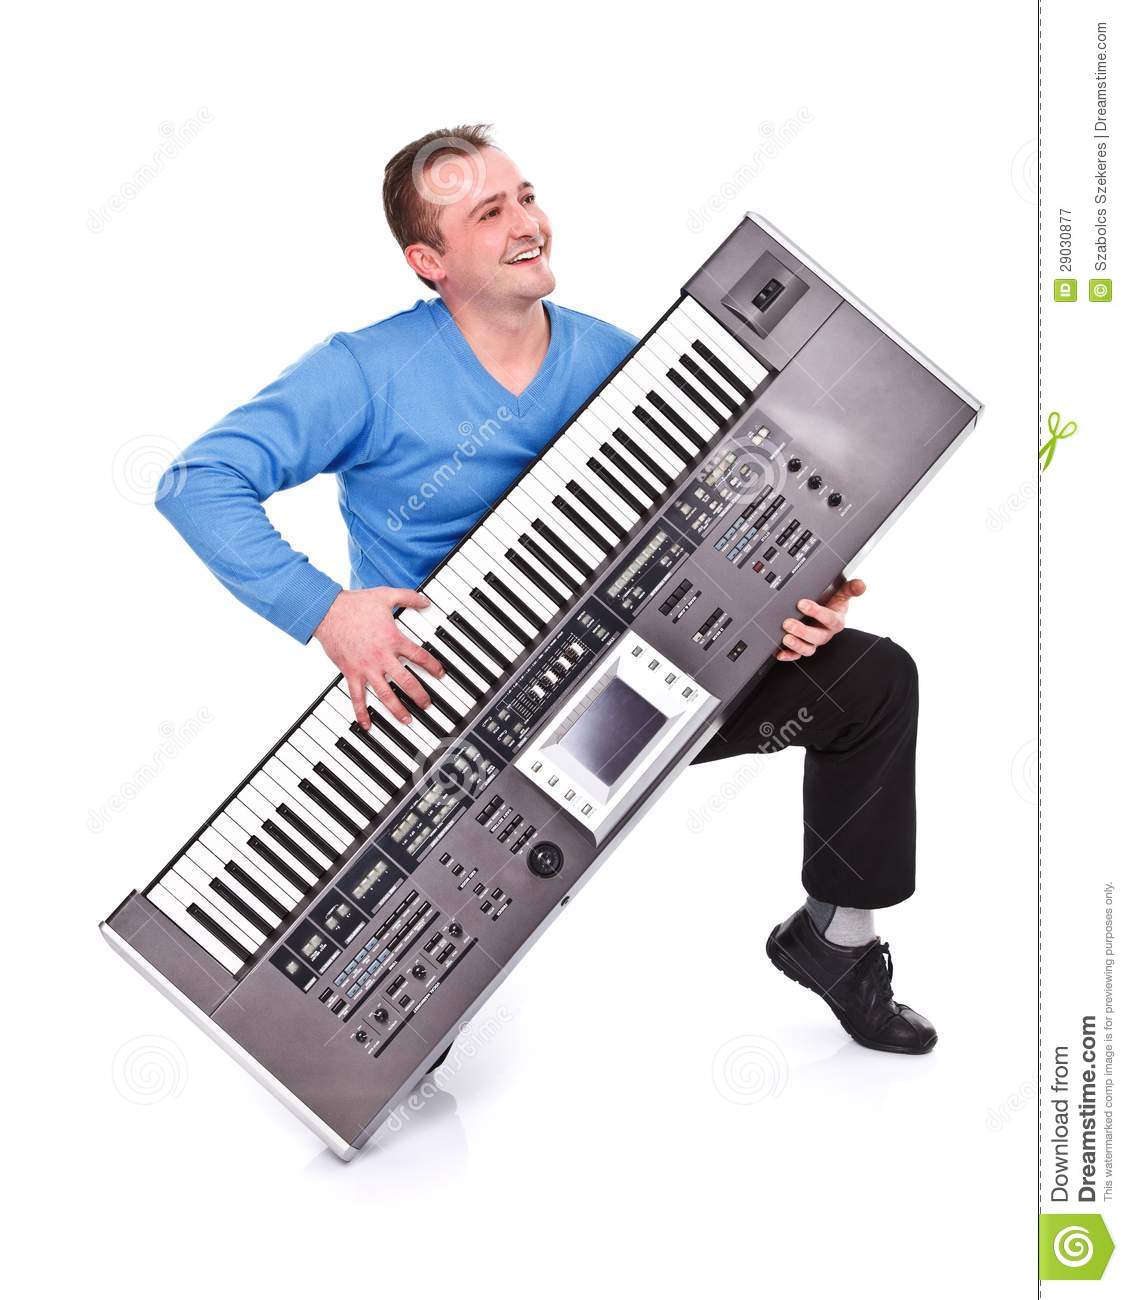 happy-man-playing-synthesizer-29030877.jpg